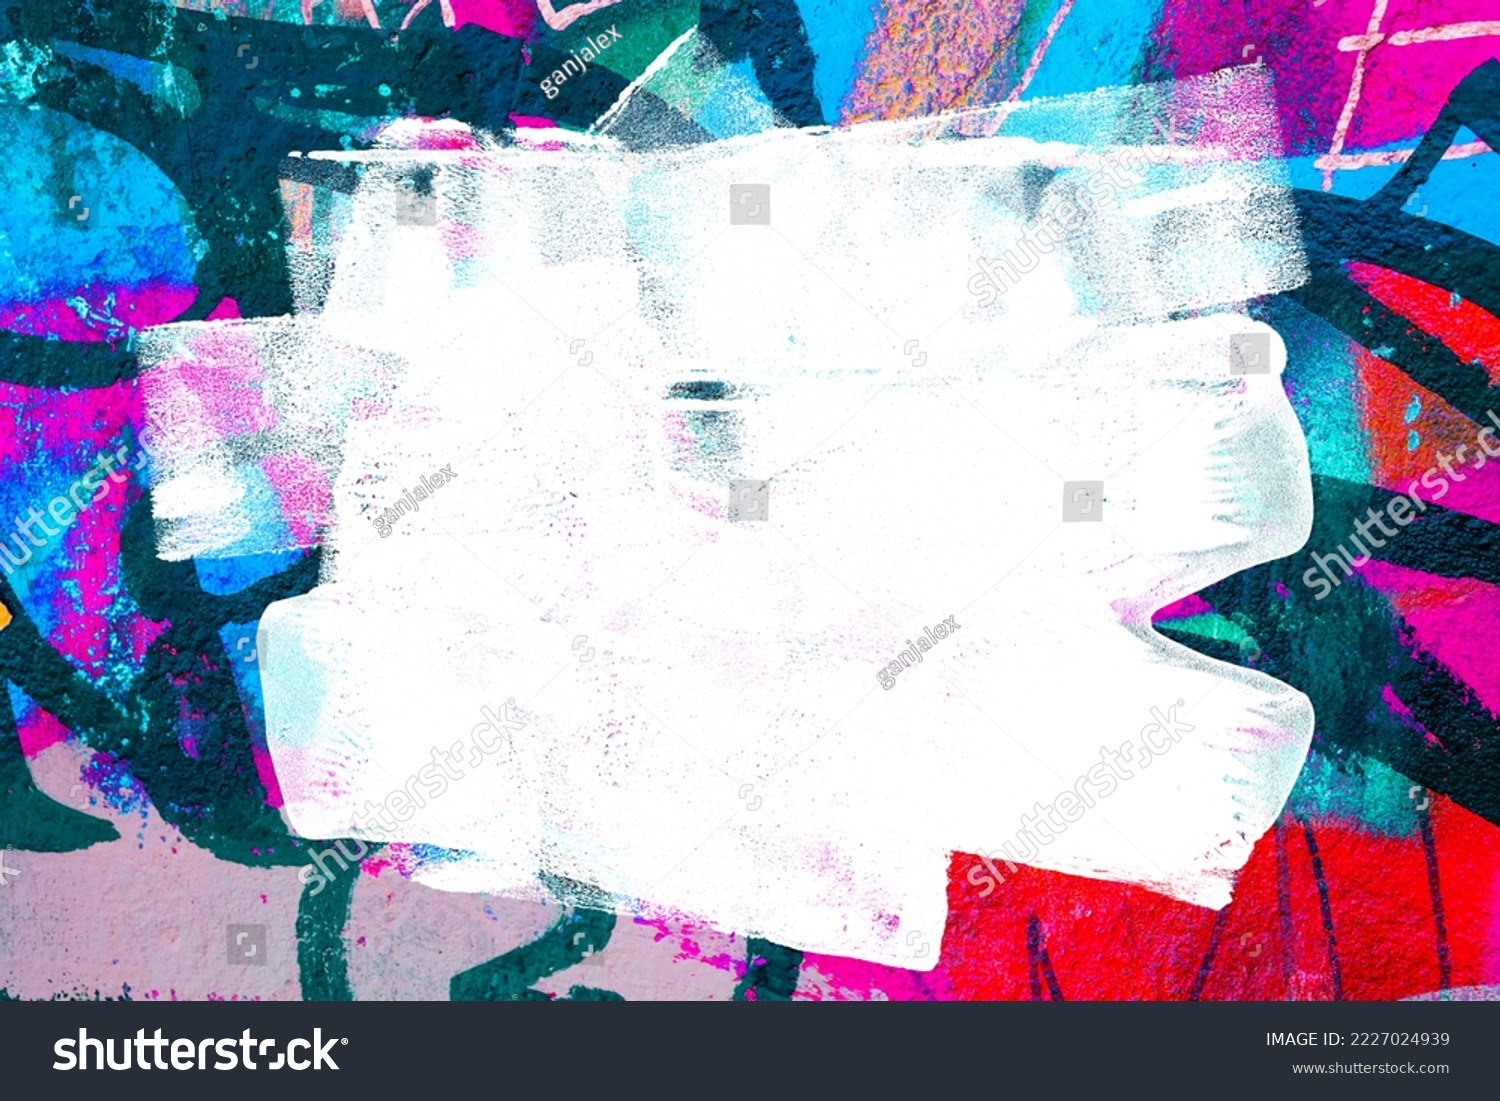 Closeup of colorful teal, blue and red urban wall texture with white white paint stroke. Modern pattern for design. Creative urban city background. Grunge messy street style background with copy space #2227024939